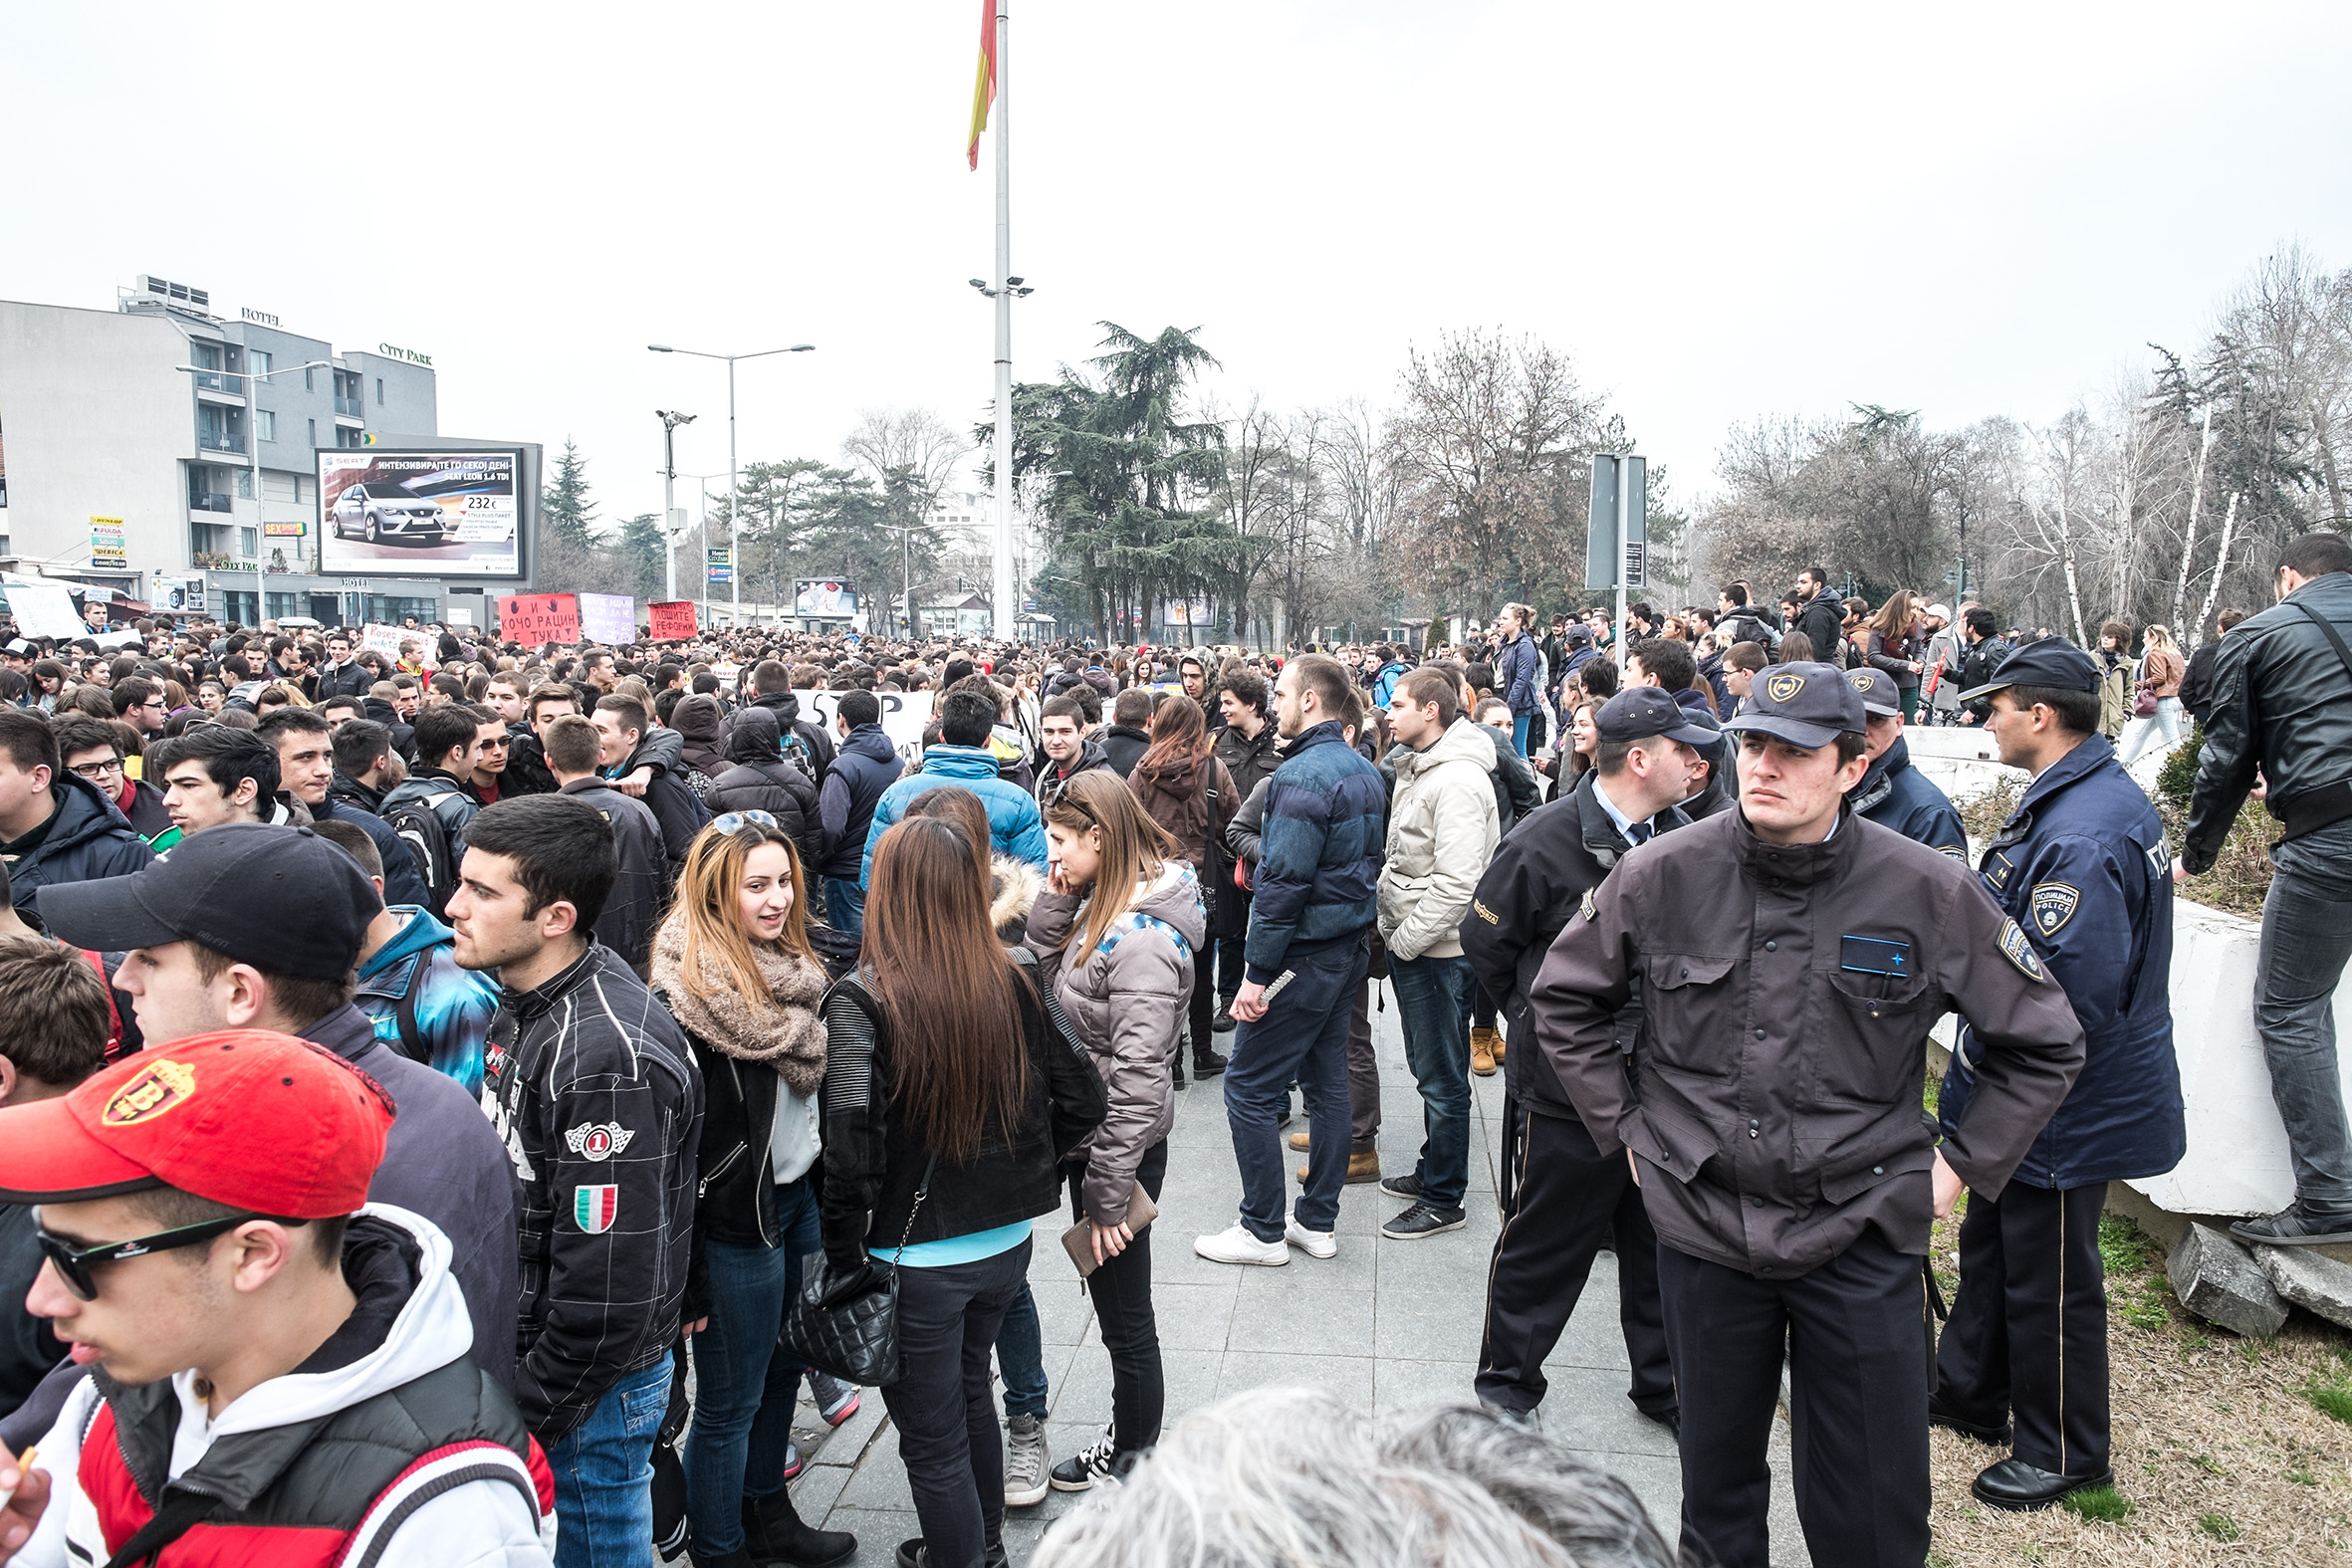 Hundreds of teenagers gathered for the protest in Skopje on March 21, 2015, and thousands in total gathered in other cities throughout the country. 